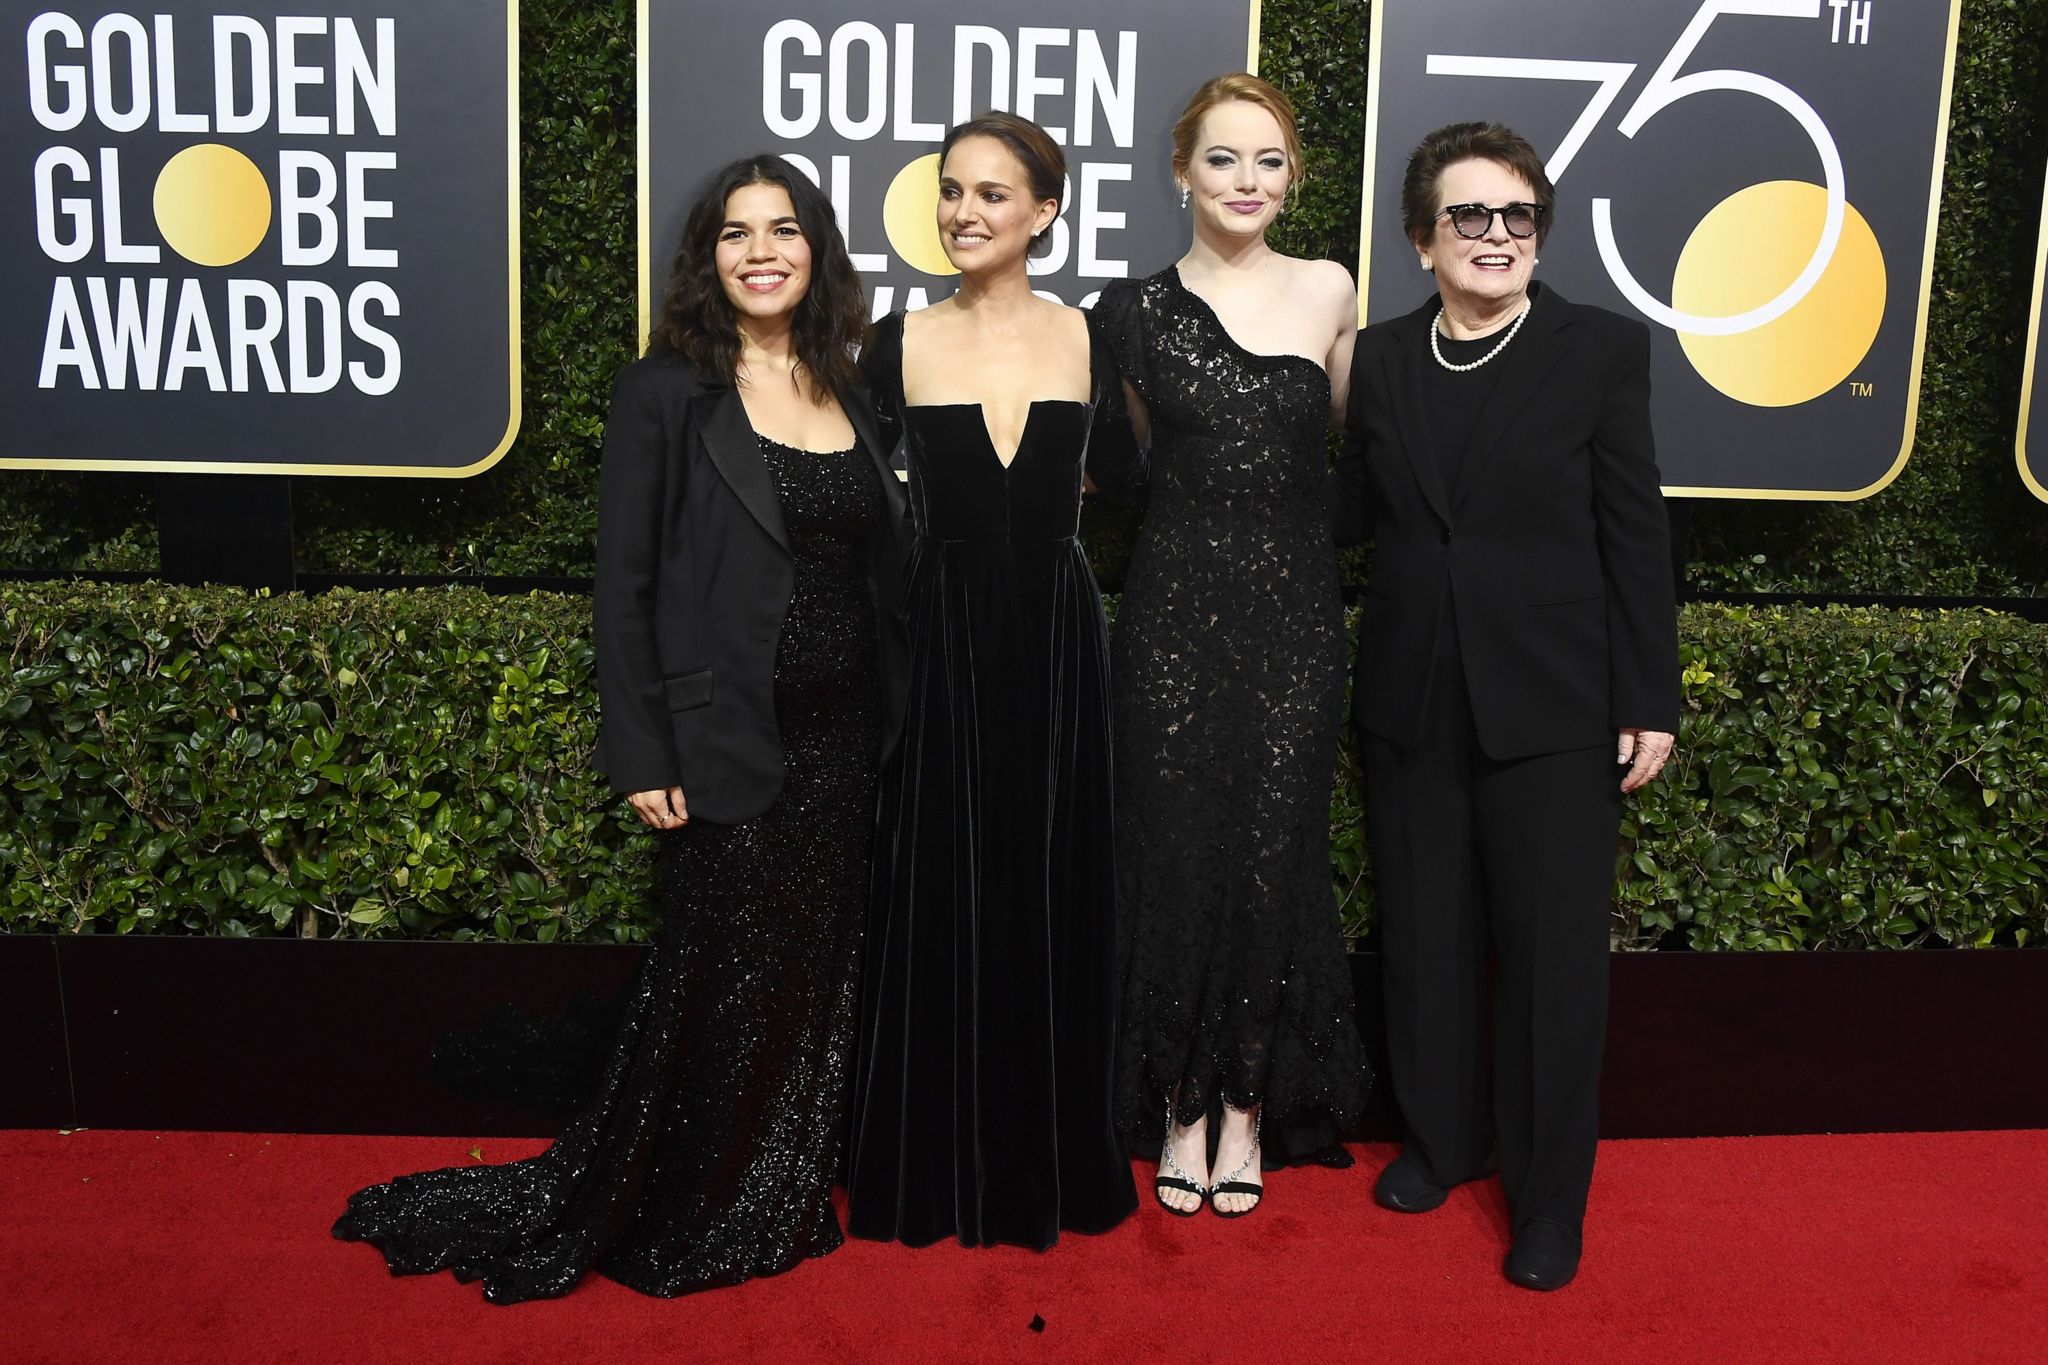 Stars wearing back on the red carpet at the 75th Golden Globe Awards